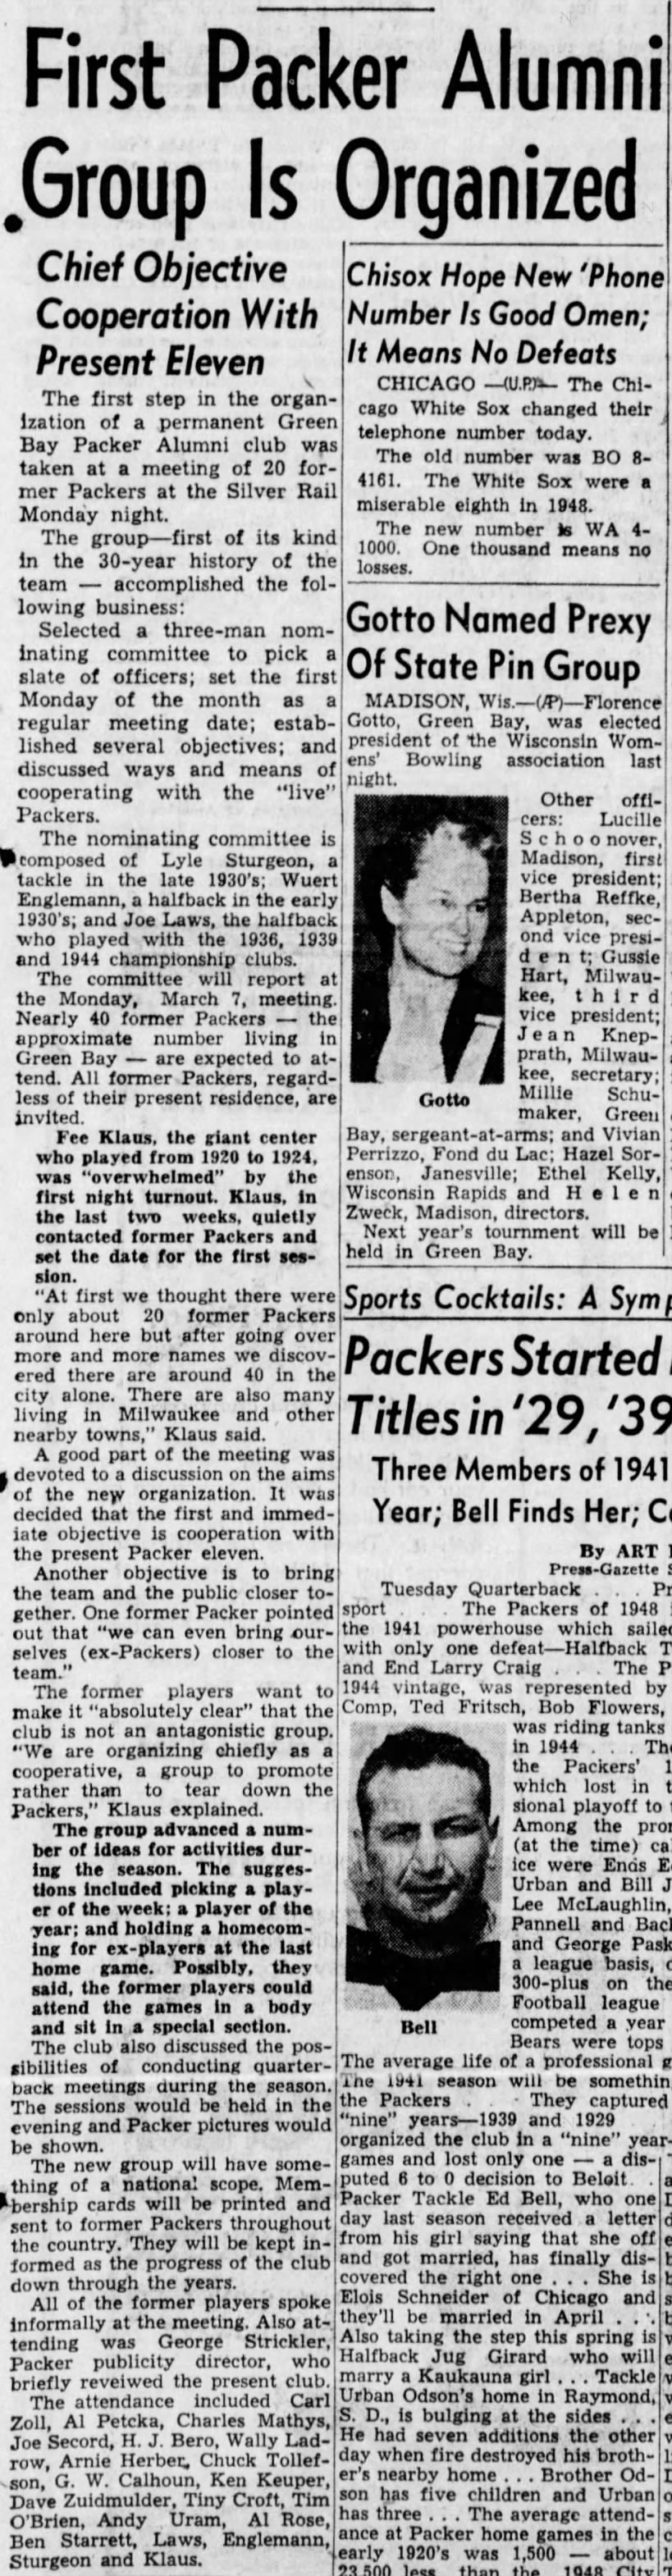 First Packer Alumni Group Is Organized